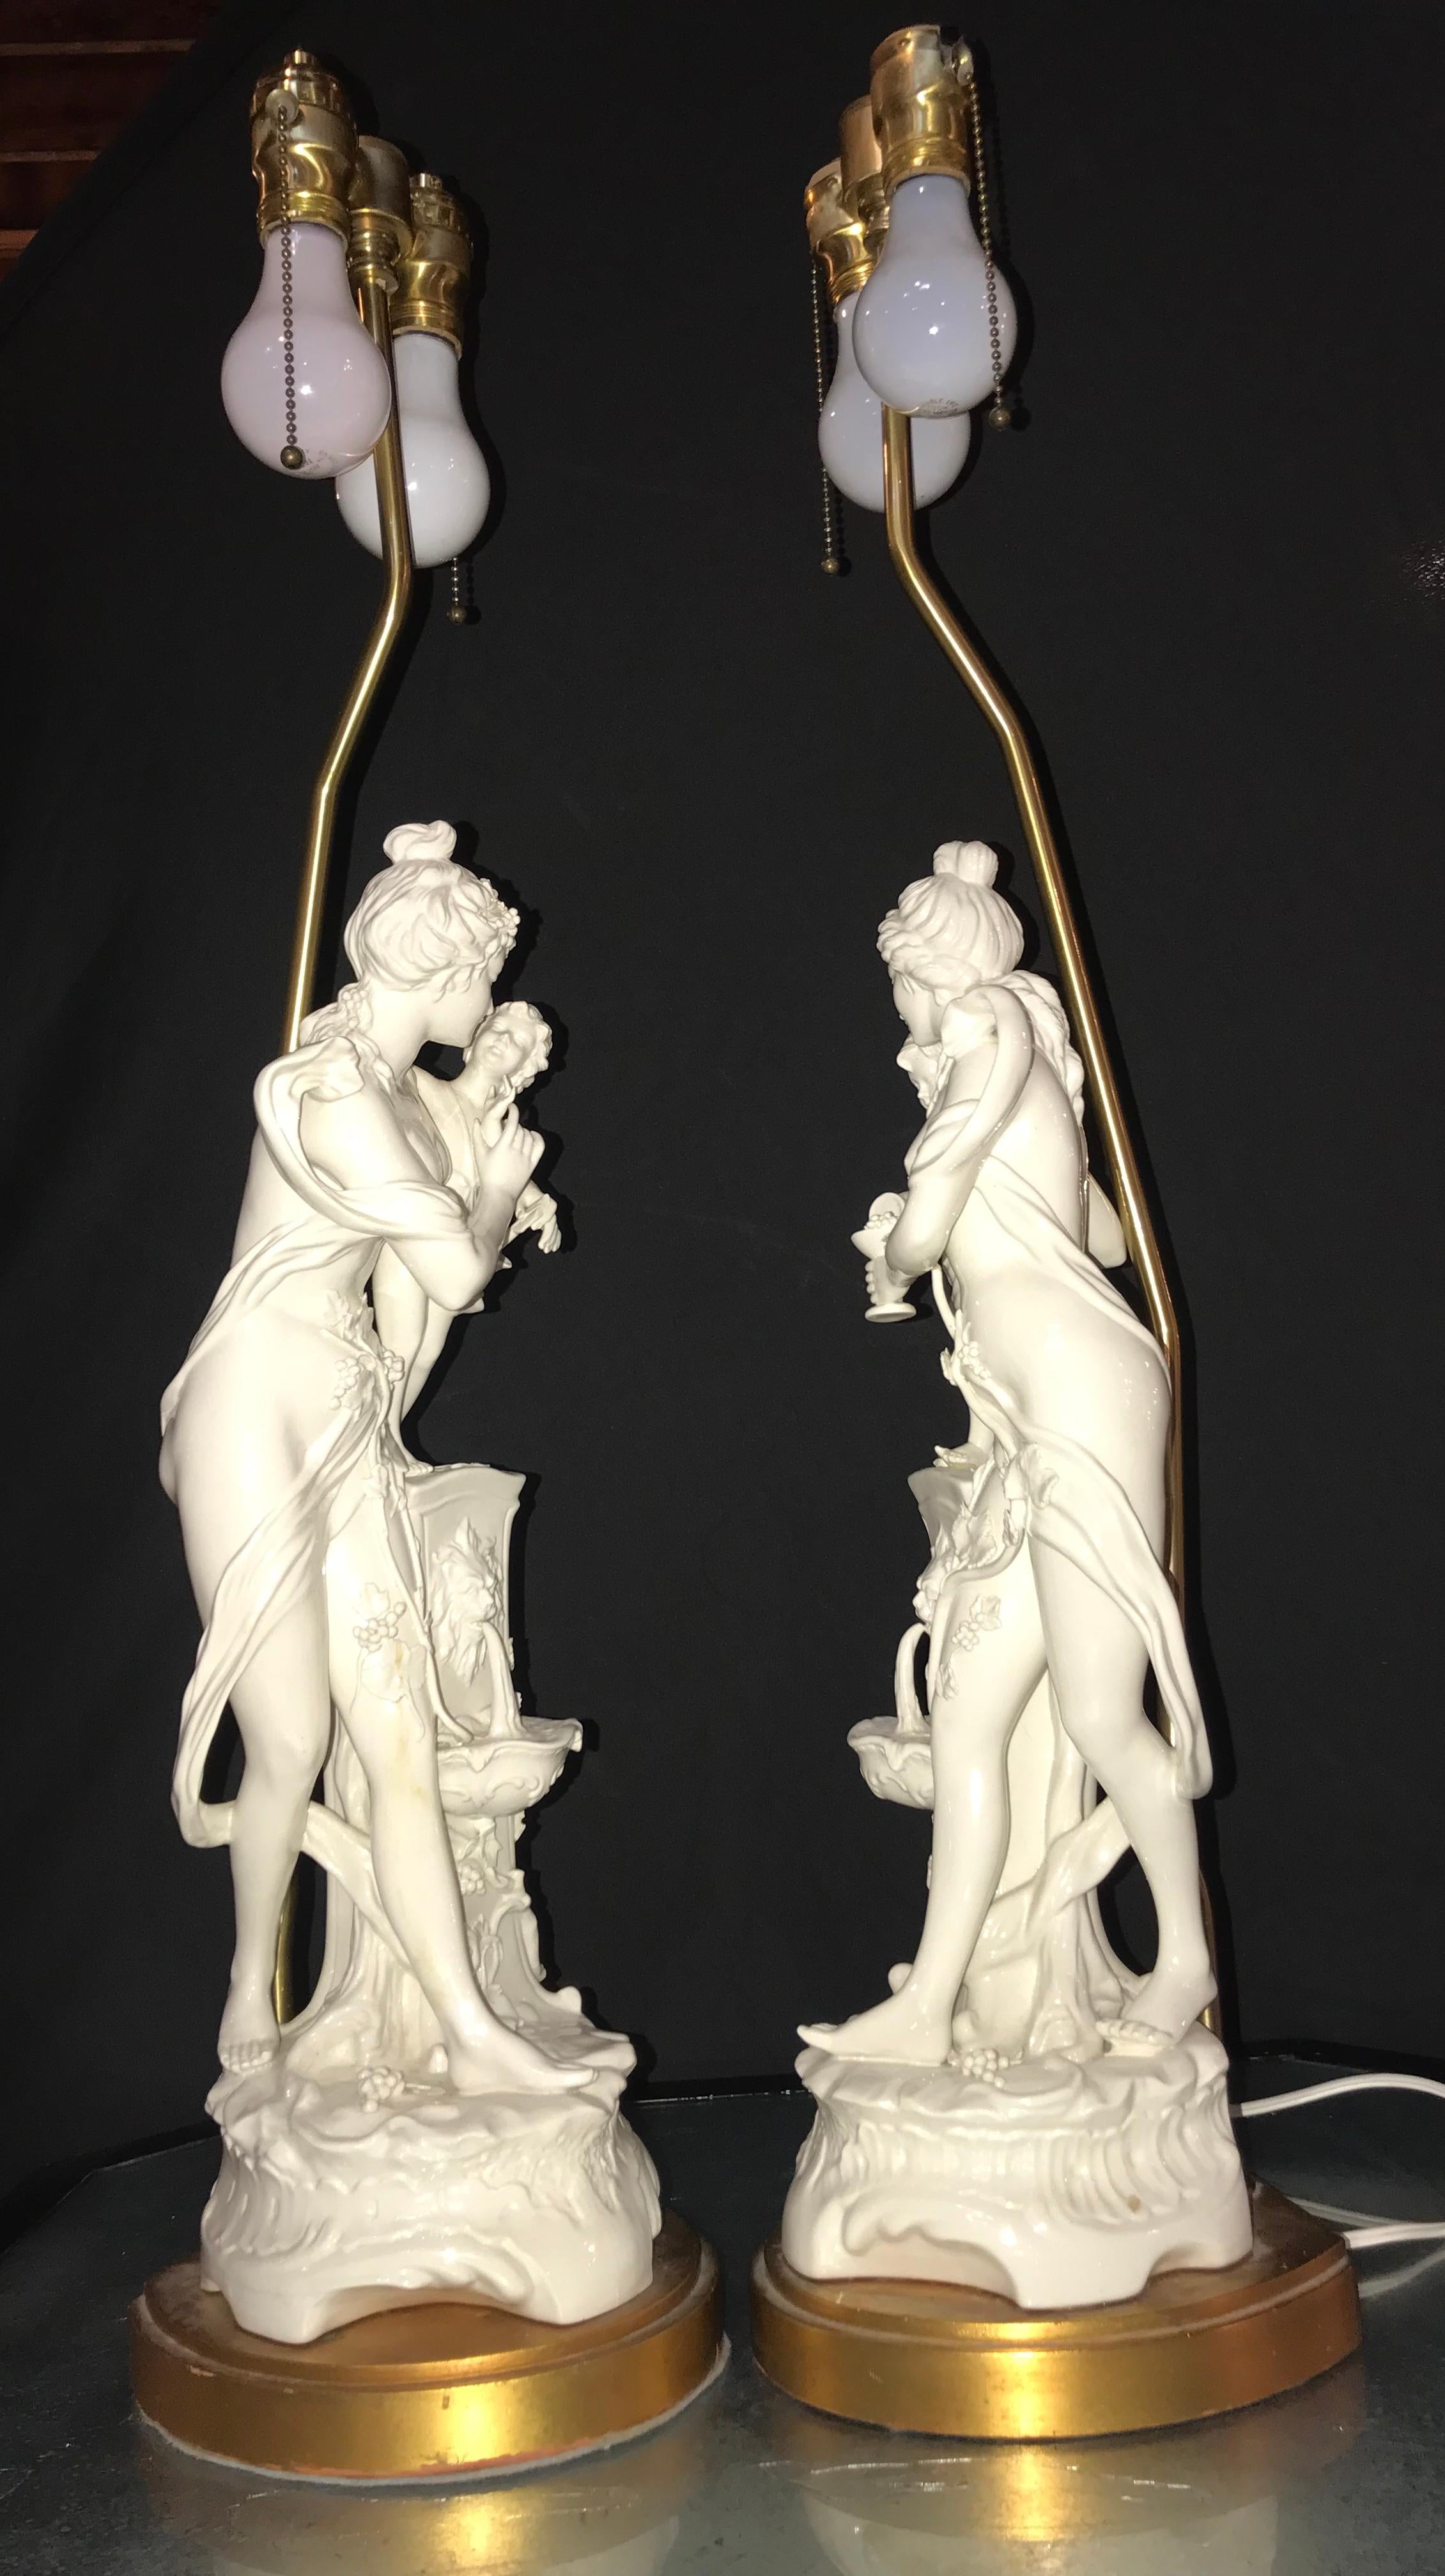 Pair of Large Porcelain Figural Opposing Bare Brested Woman & Angel Table Lamps im Zustand „Gut“ in Stamford, CT